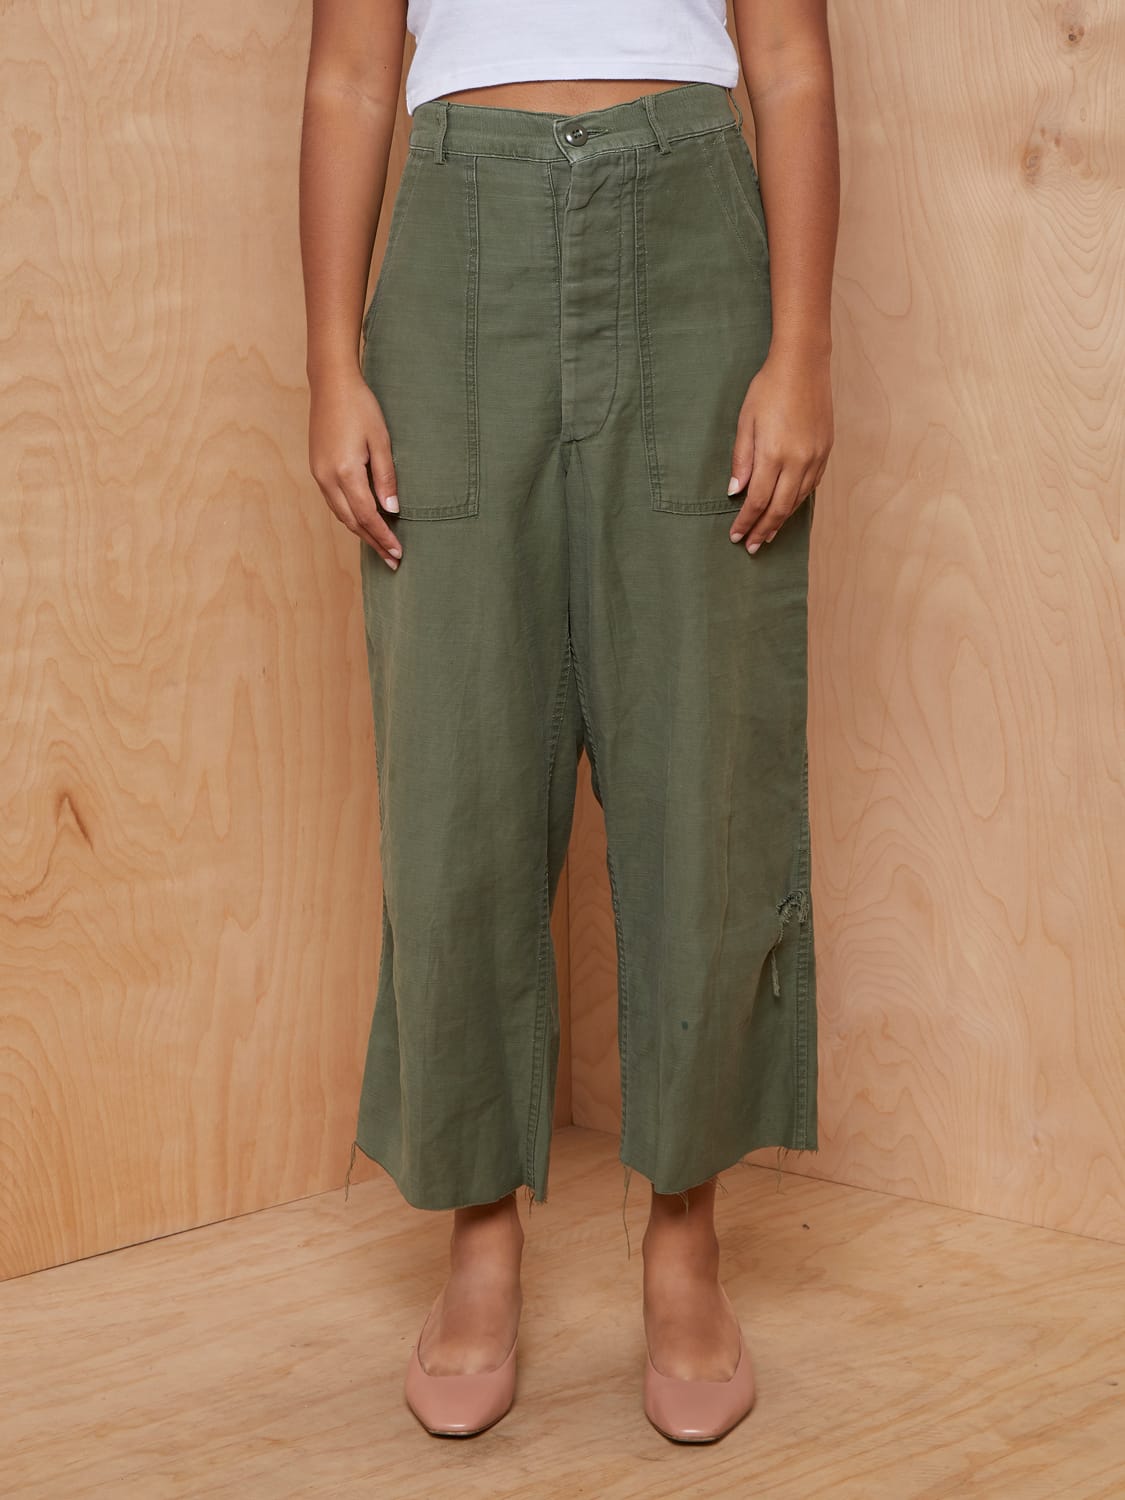 Vintage Moss Green Army Pants